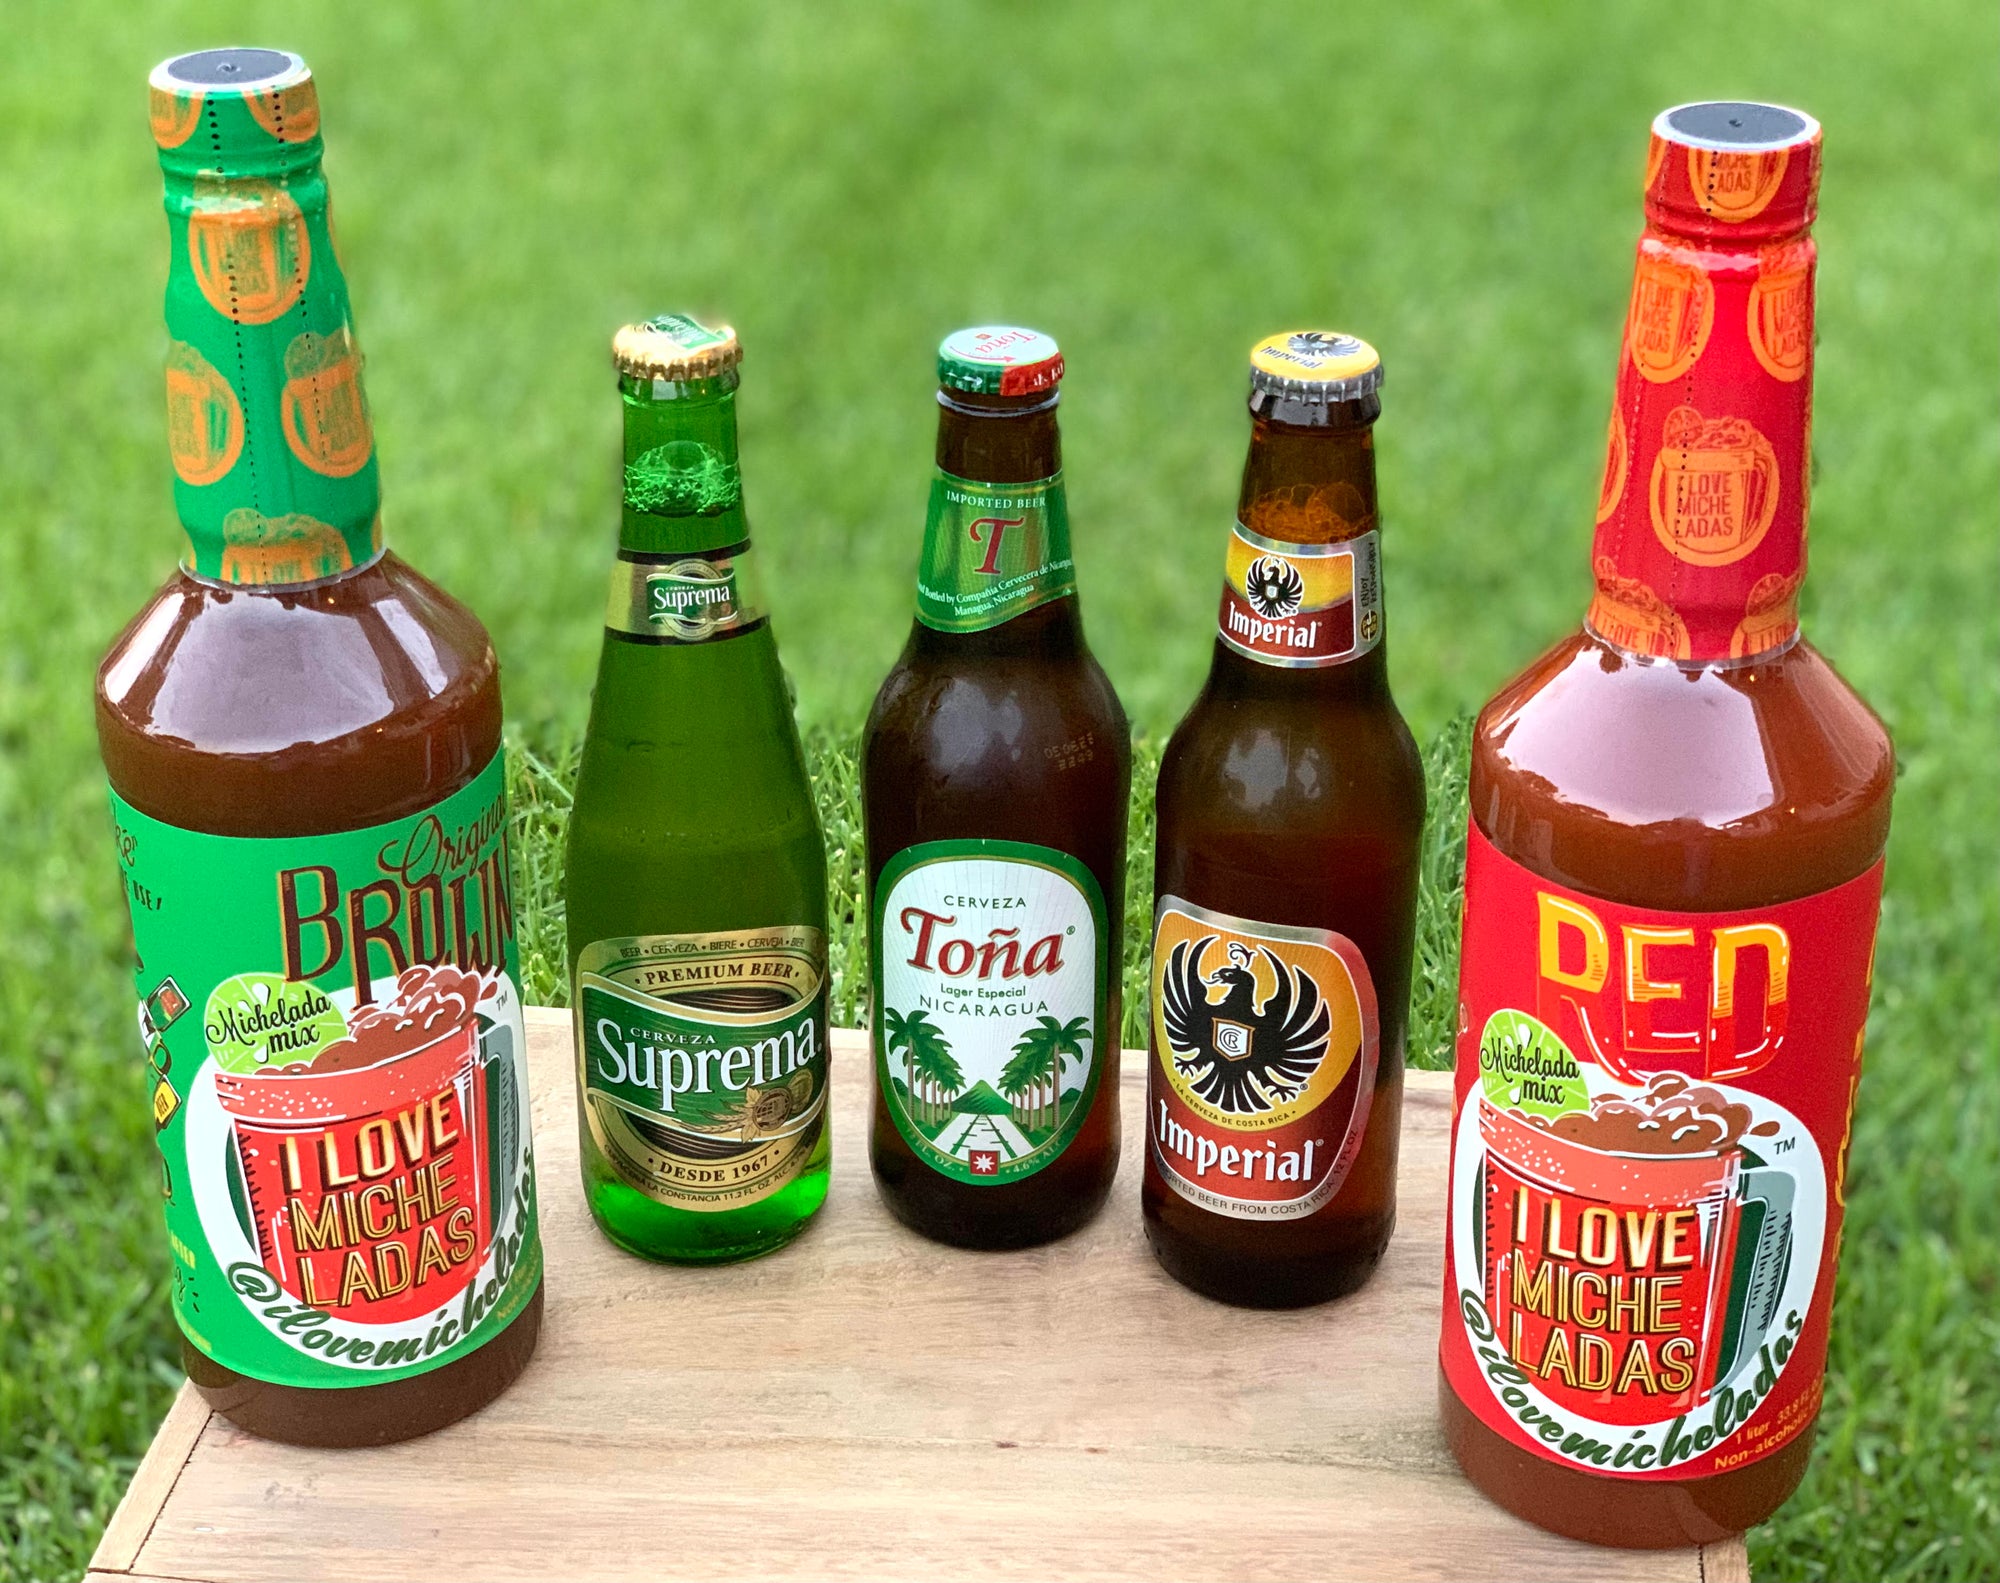 BEER RUN OF THE WEEK: WILL ANY OF THESE CENTRAL AMERICAN BEERS BE AS HARMONIOUS WITH OUR “I LOVE MICHELADAS” MIXES AS WELL AS KANYE WEST’S RELATIONSHIP WITH HIMSELF?